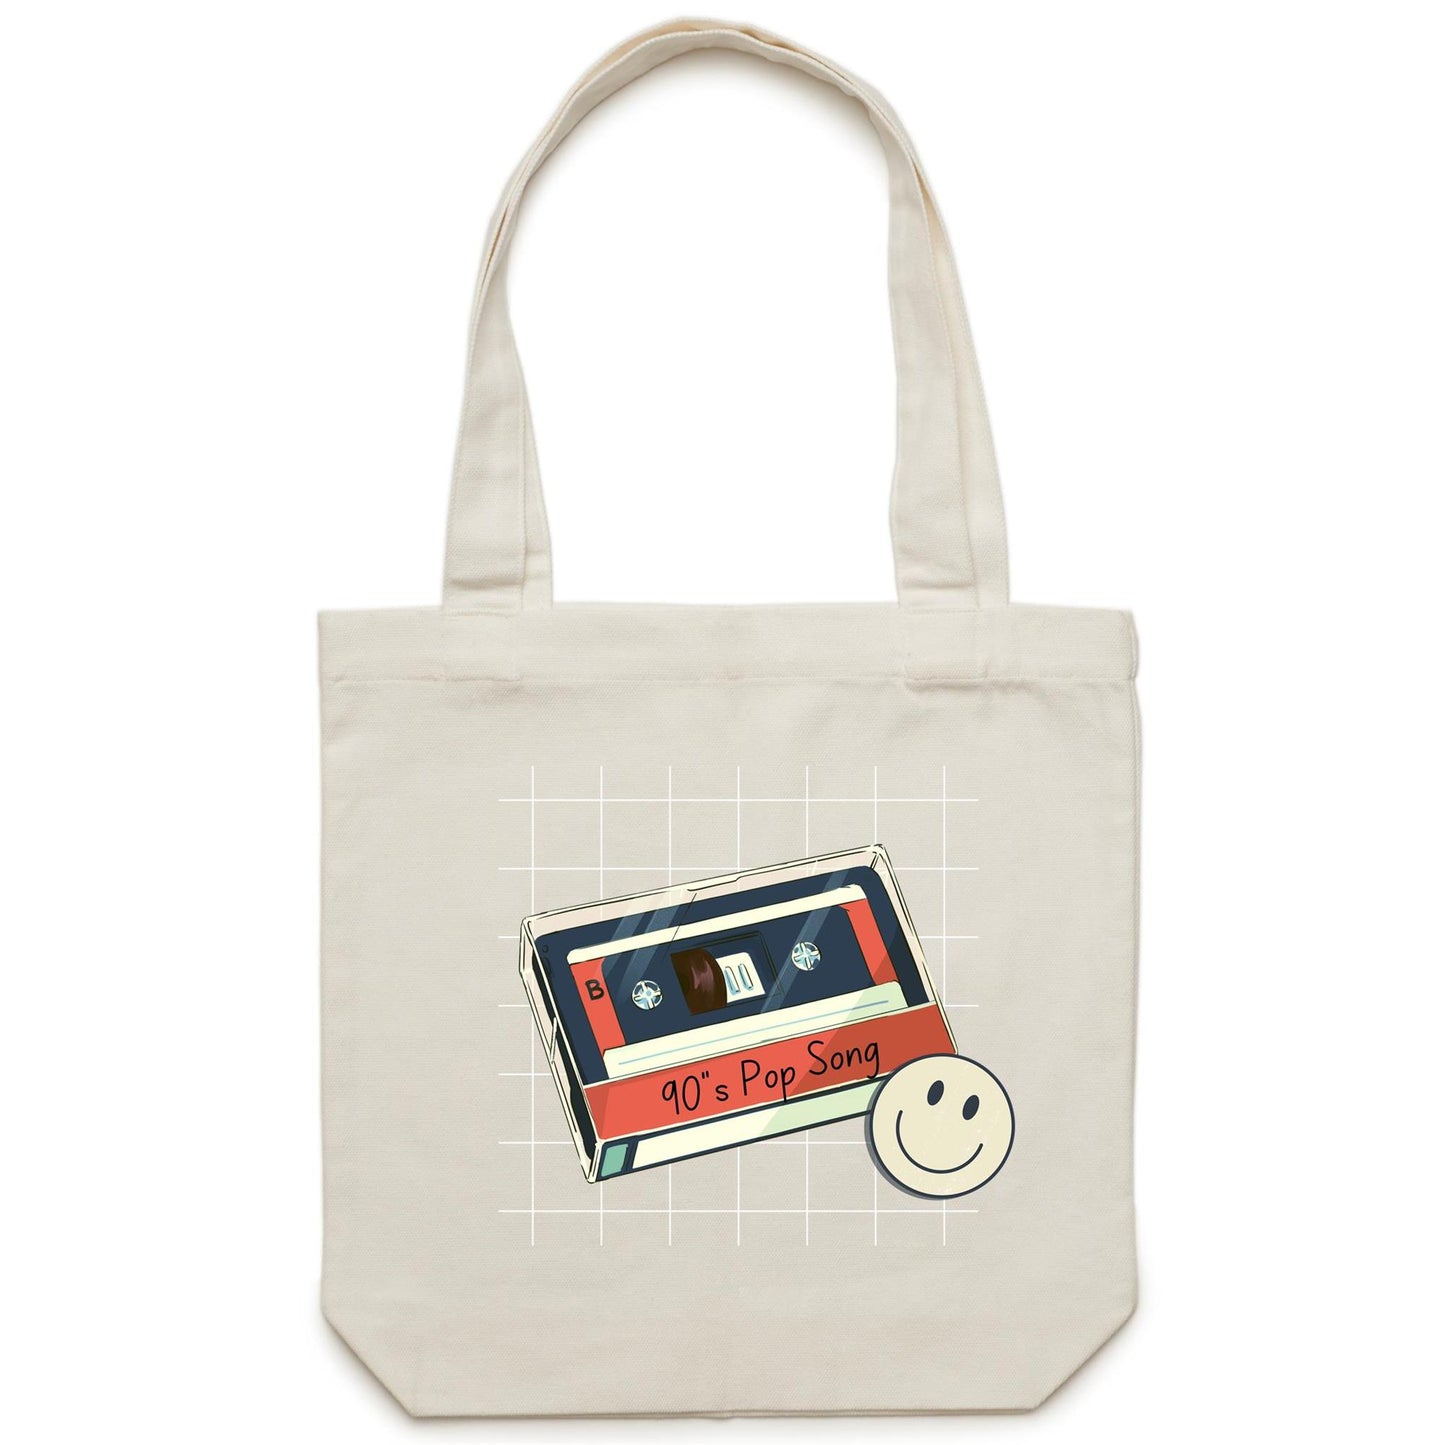 90's Pop Song - Canvas Tote Bag Tote Bag Music Retro